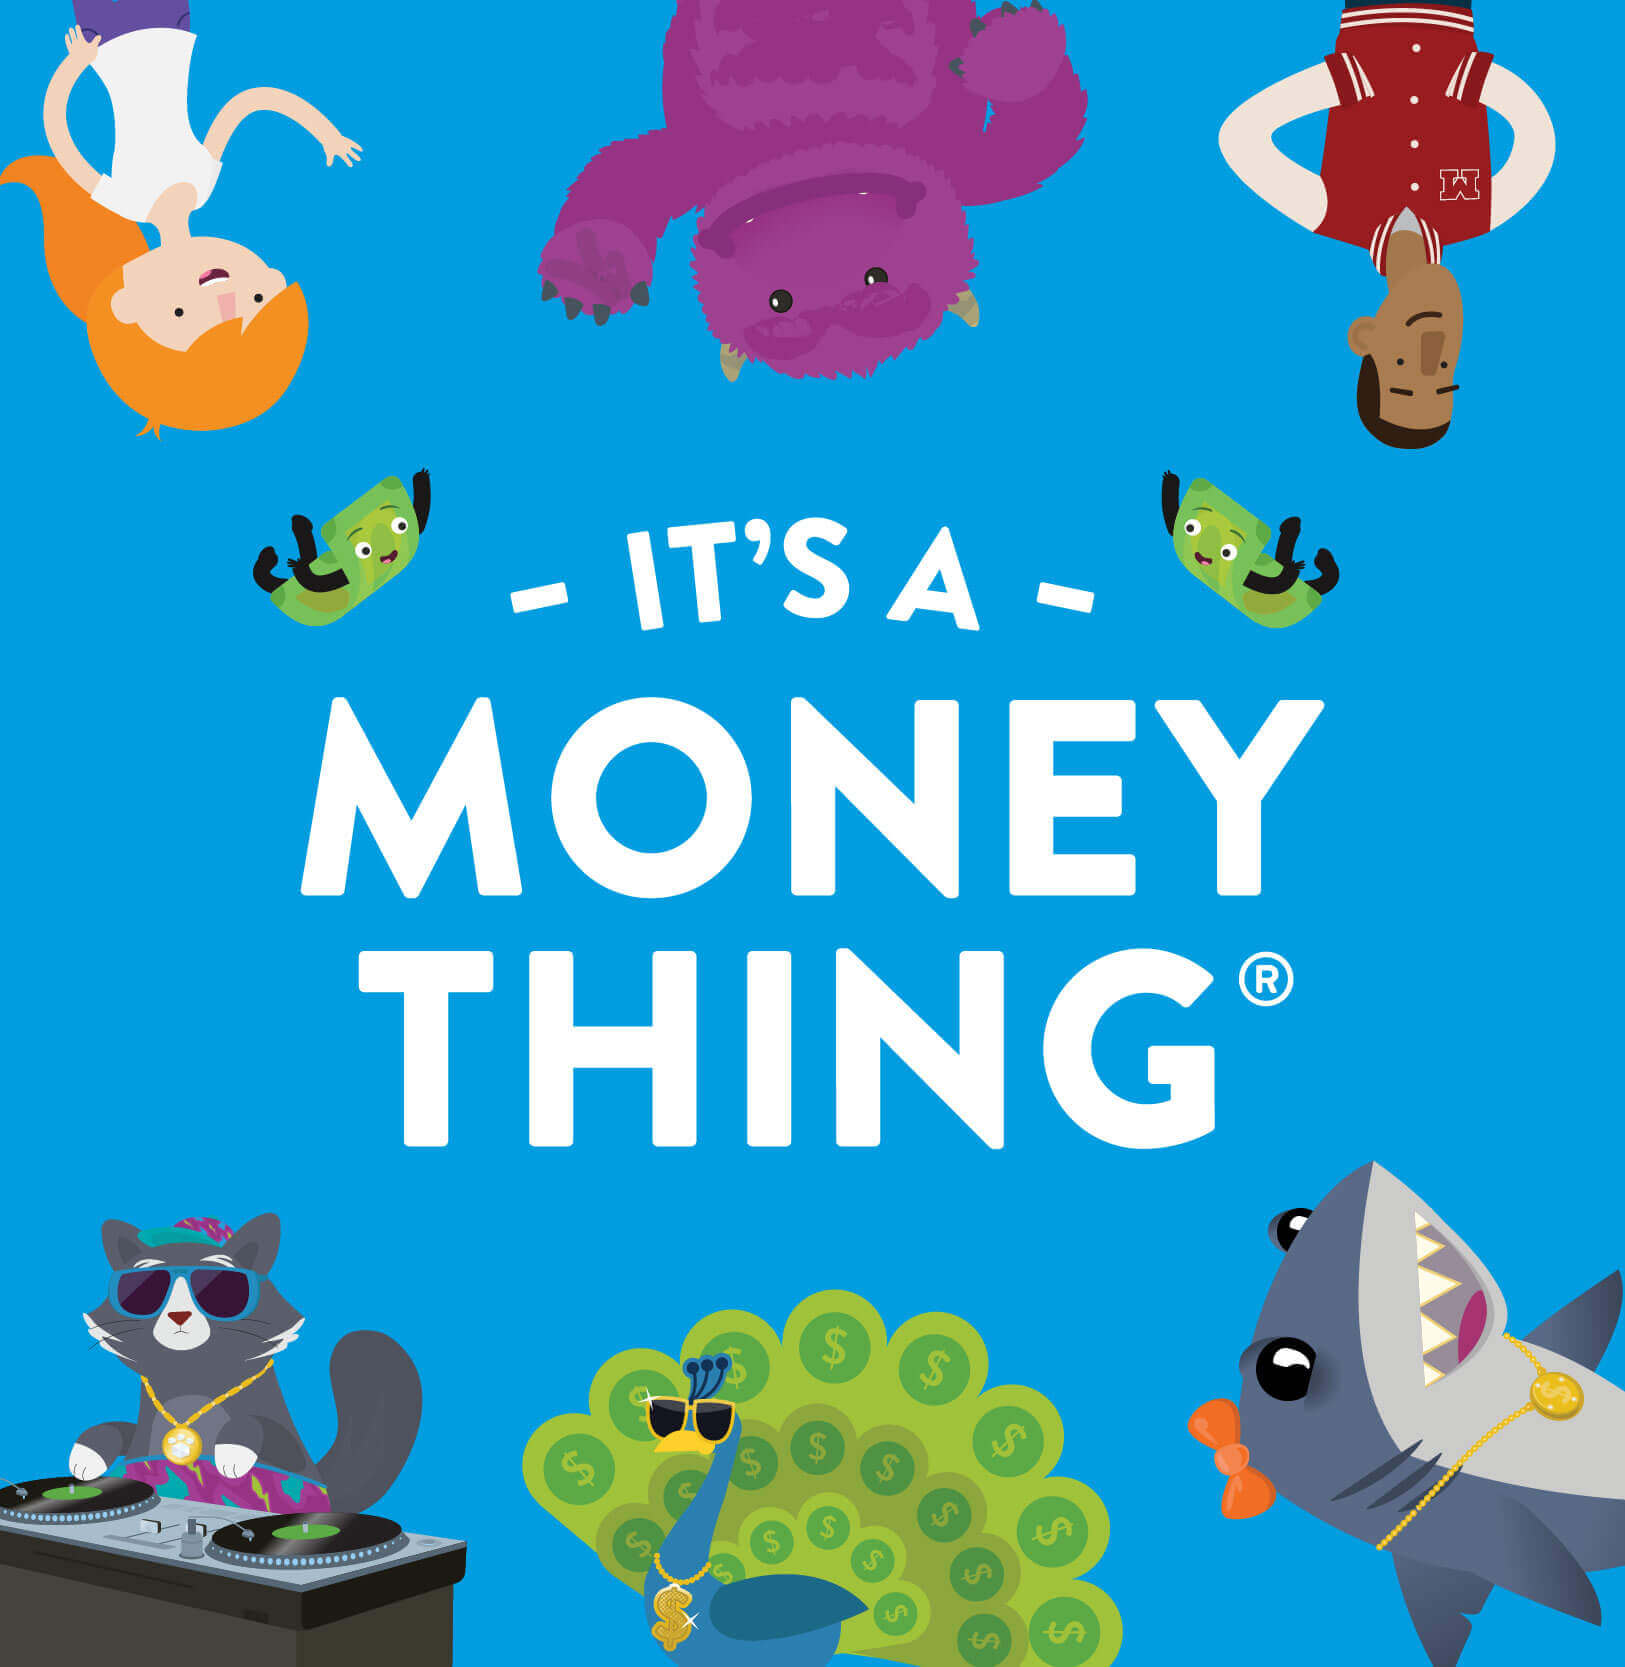 Cartoon characters from the It's a Money Thing series of financial literacy education videos and documents.